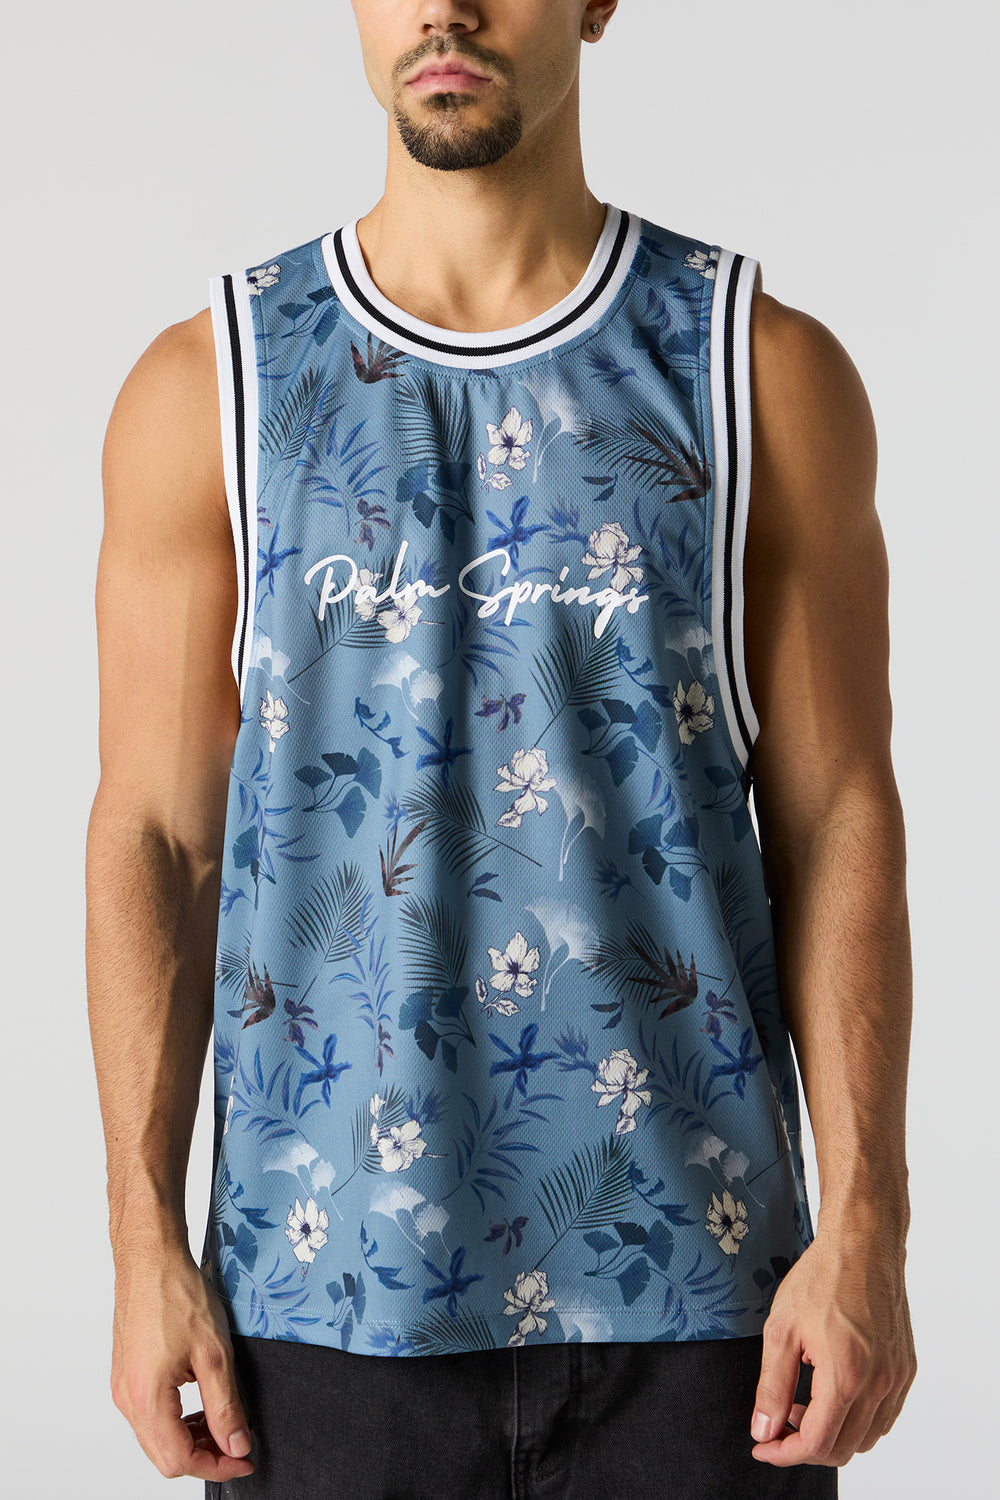 Floral Print Palm Springs Graphic Basketball Jersey Floral Print Palm Springs Graphic Basketball Jersey 2